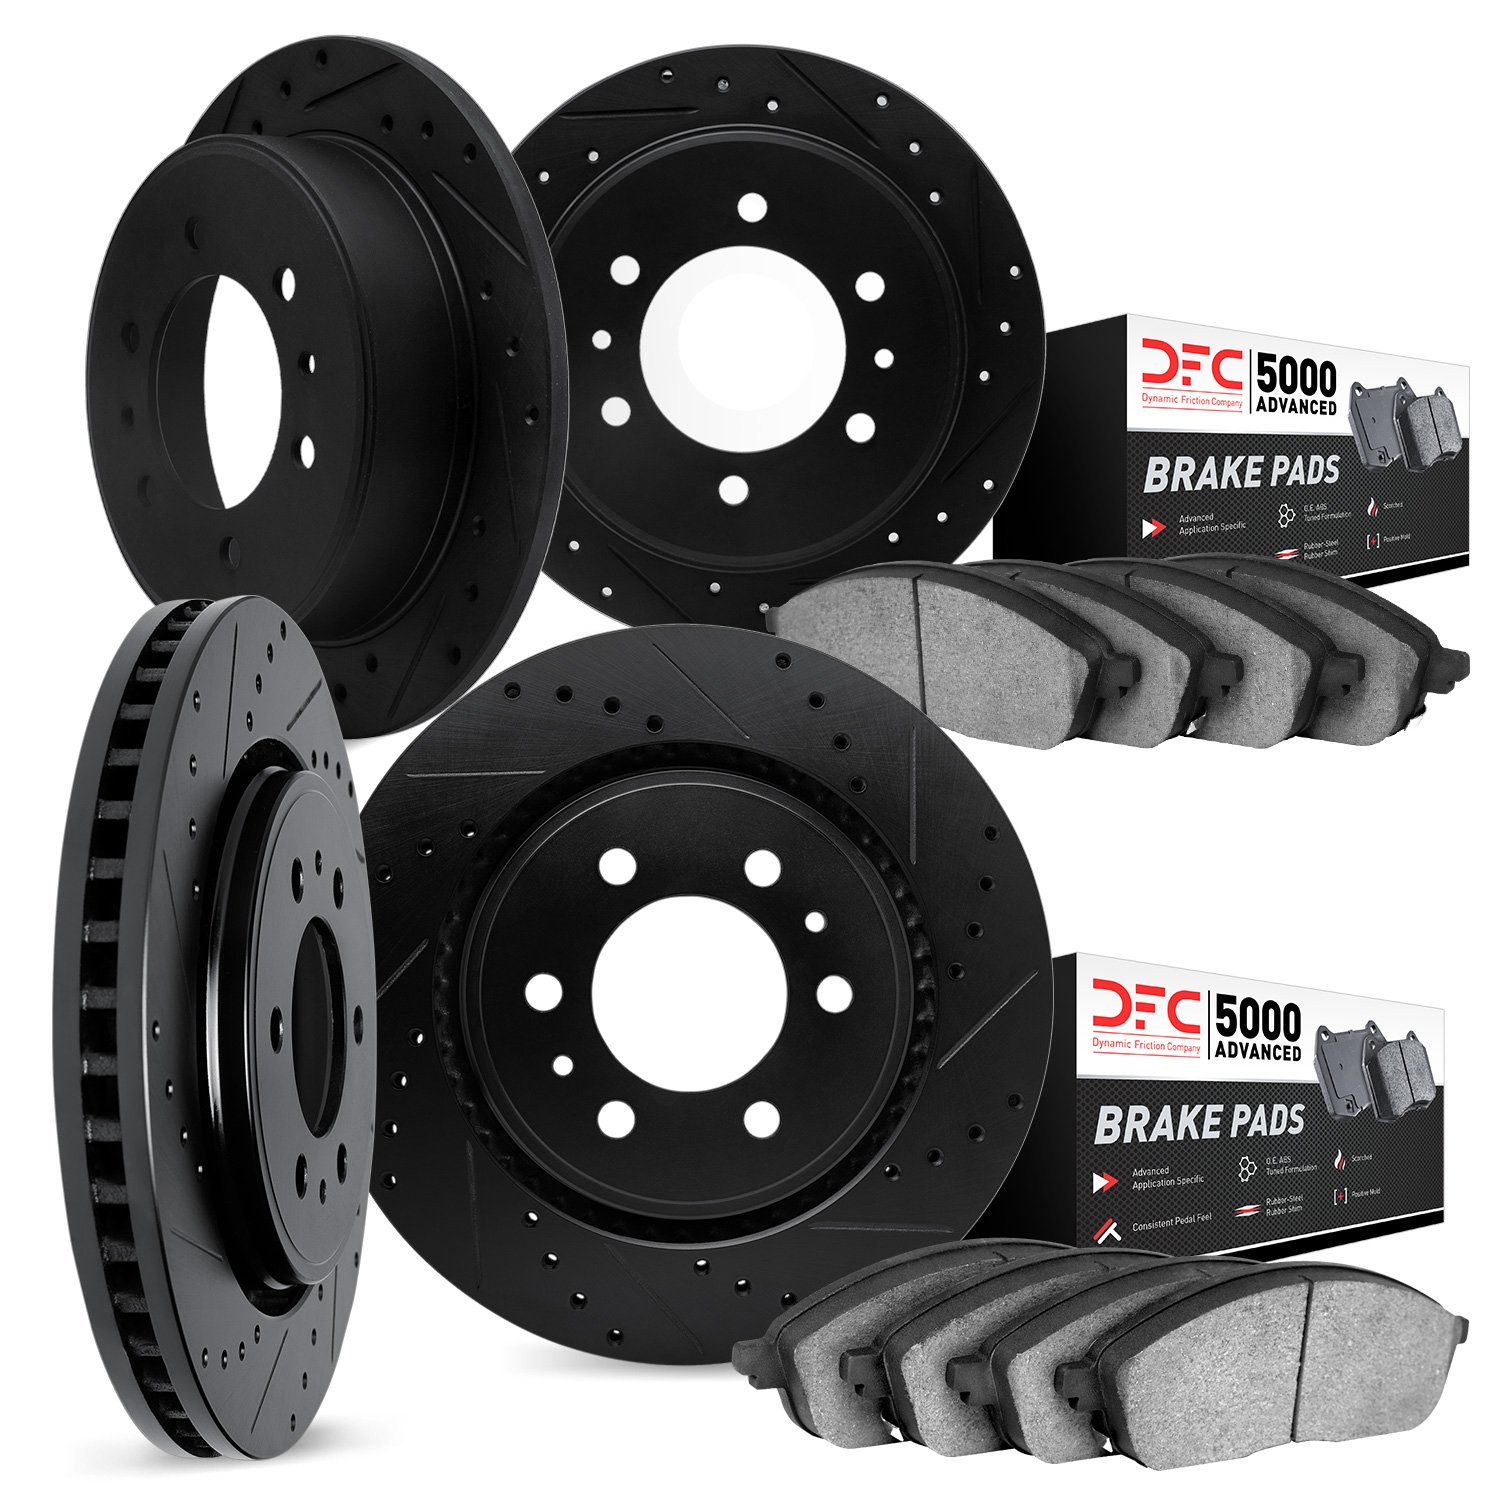 8504-93001 Drilled/Slotted Brake Rotors w/5000 Advanced Brake Pads Kit [Black], 2006-2010 GM, Position: Front and Rear